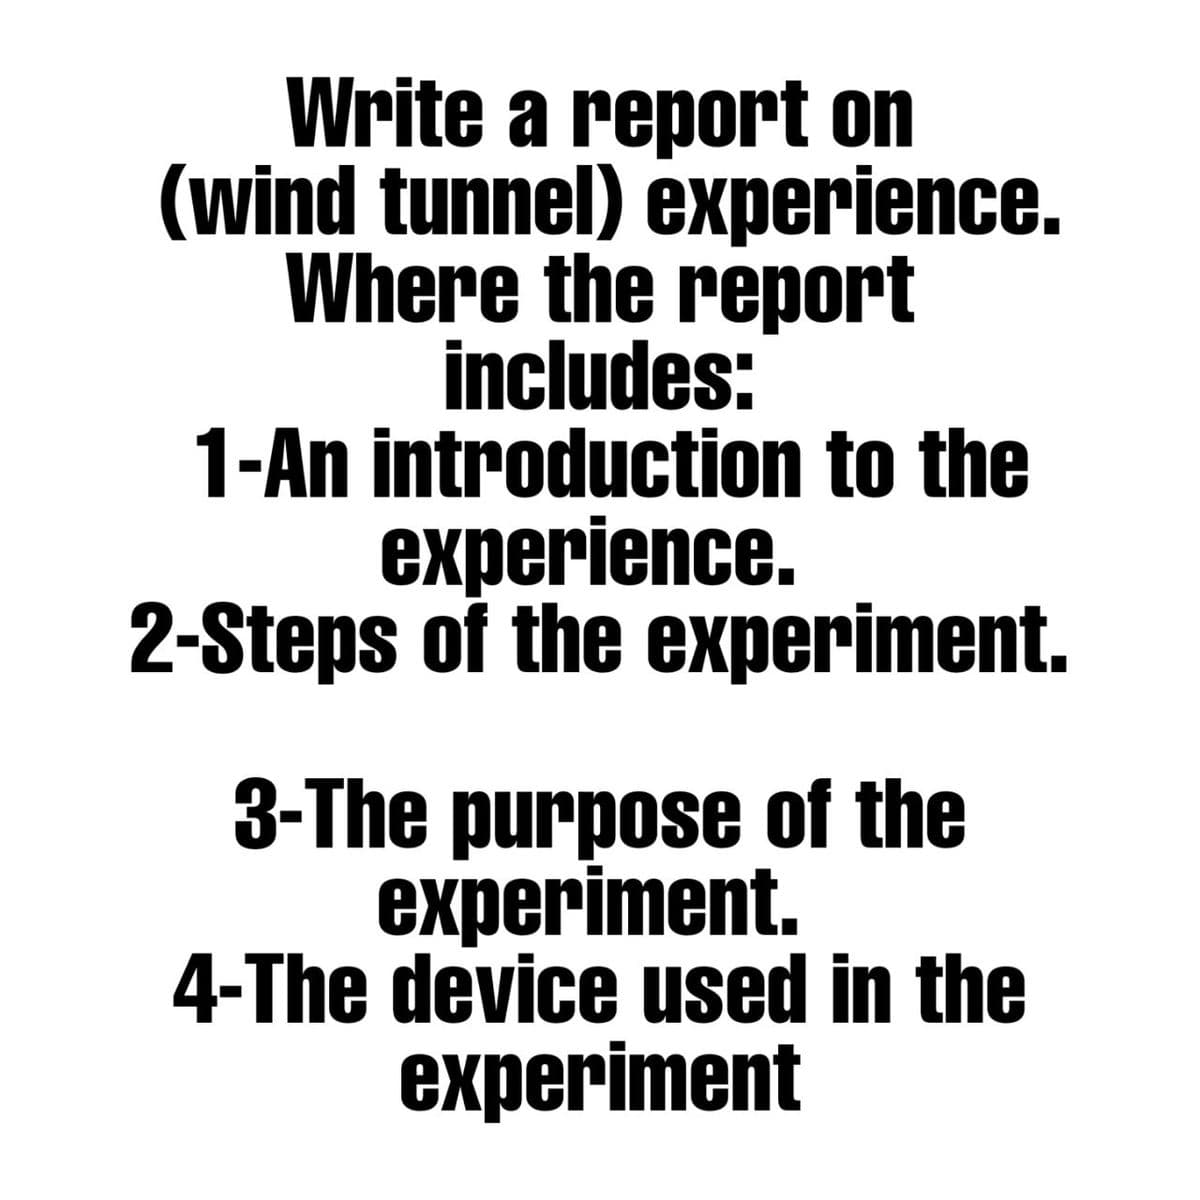 Write a report on
(wind tunnel) experience.
Where the report
includes:
1-An introduction to the
experience.
2-Steps of the experiment.
3-The purpose of the
experiment.
4-The device used in the
experiment
